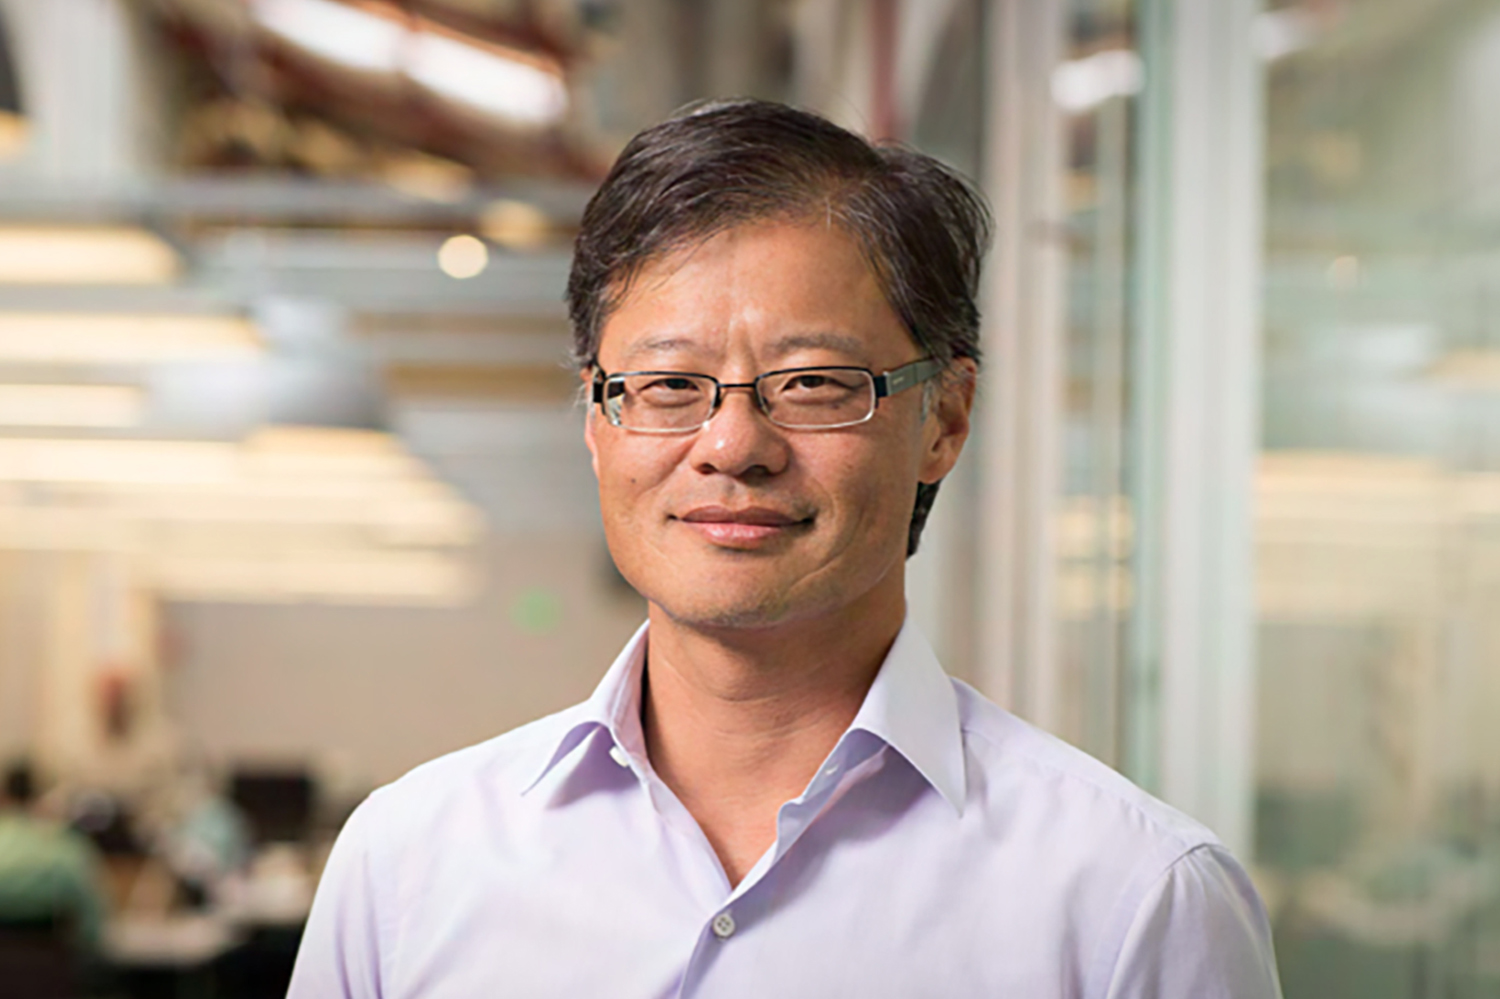 yahoo!, jerry yang uses vast resources to generously support alma mater stanford – alumni spotlight